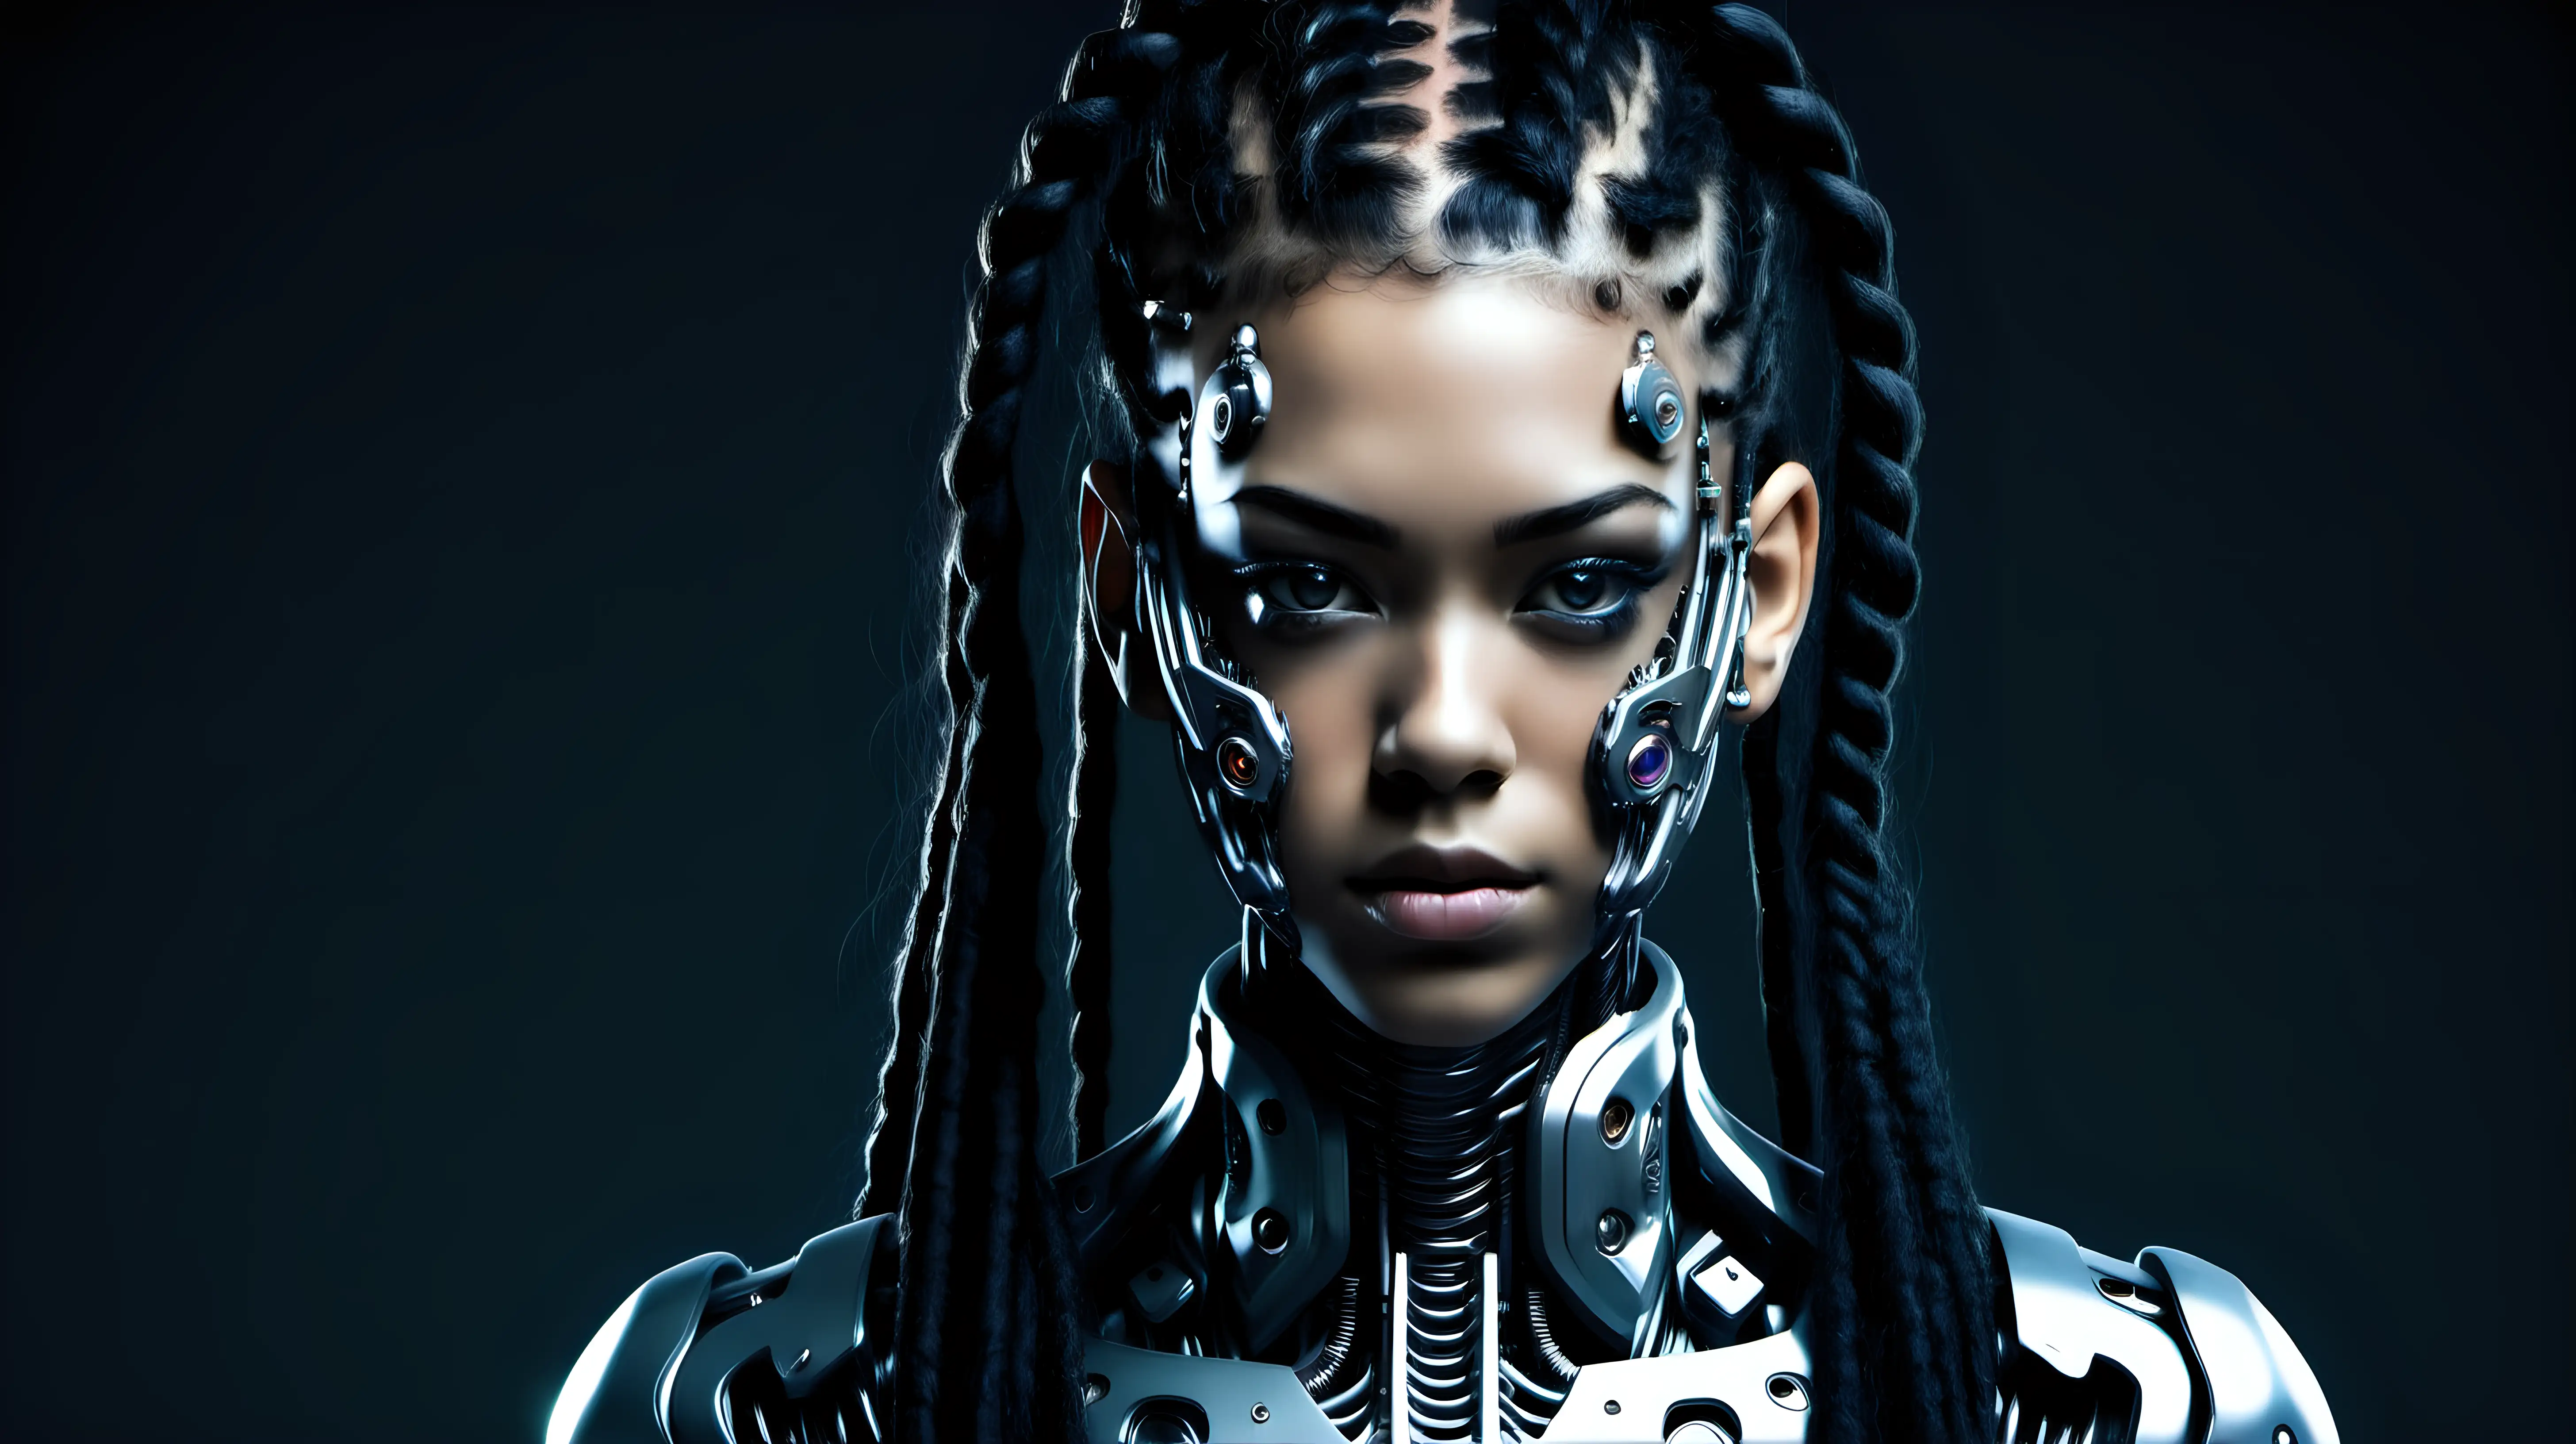 Cyborg woman, 18 years old. She has a cyborg face, but she is extremely beautiful.  Wild hair. Dark braids.